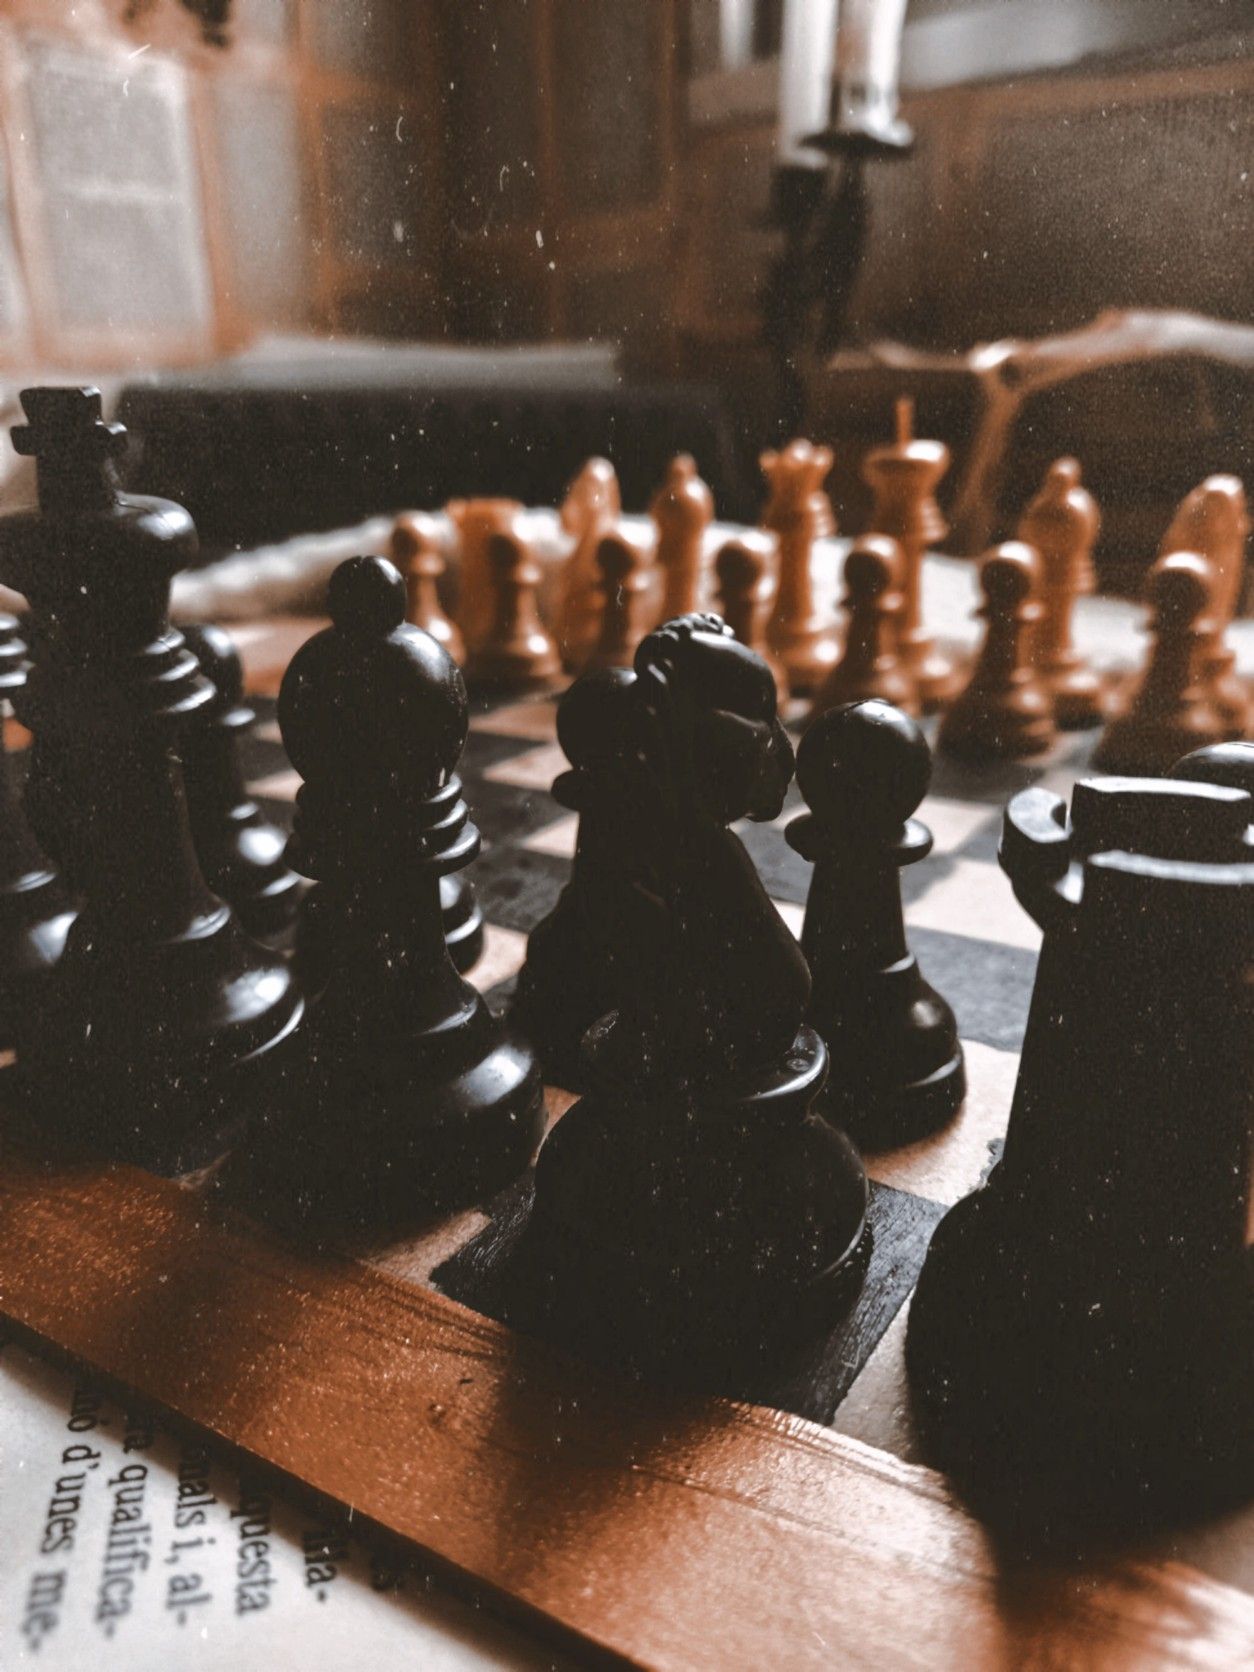 Chess pieces on a chess board. - Chess